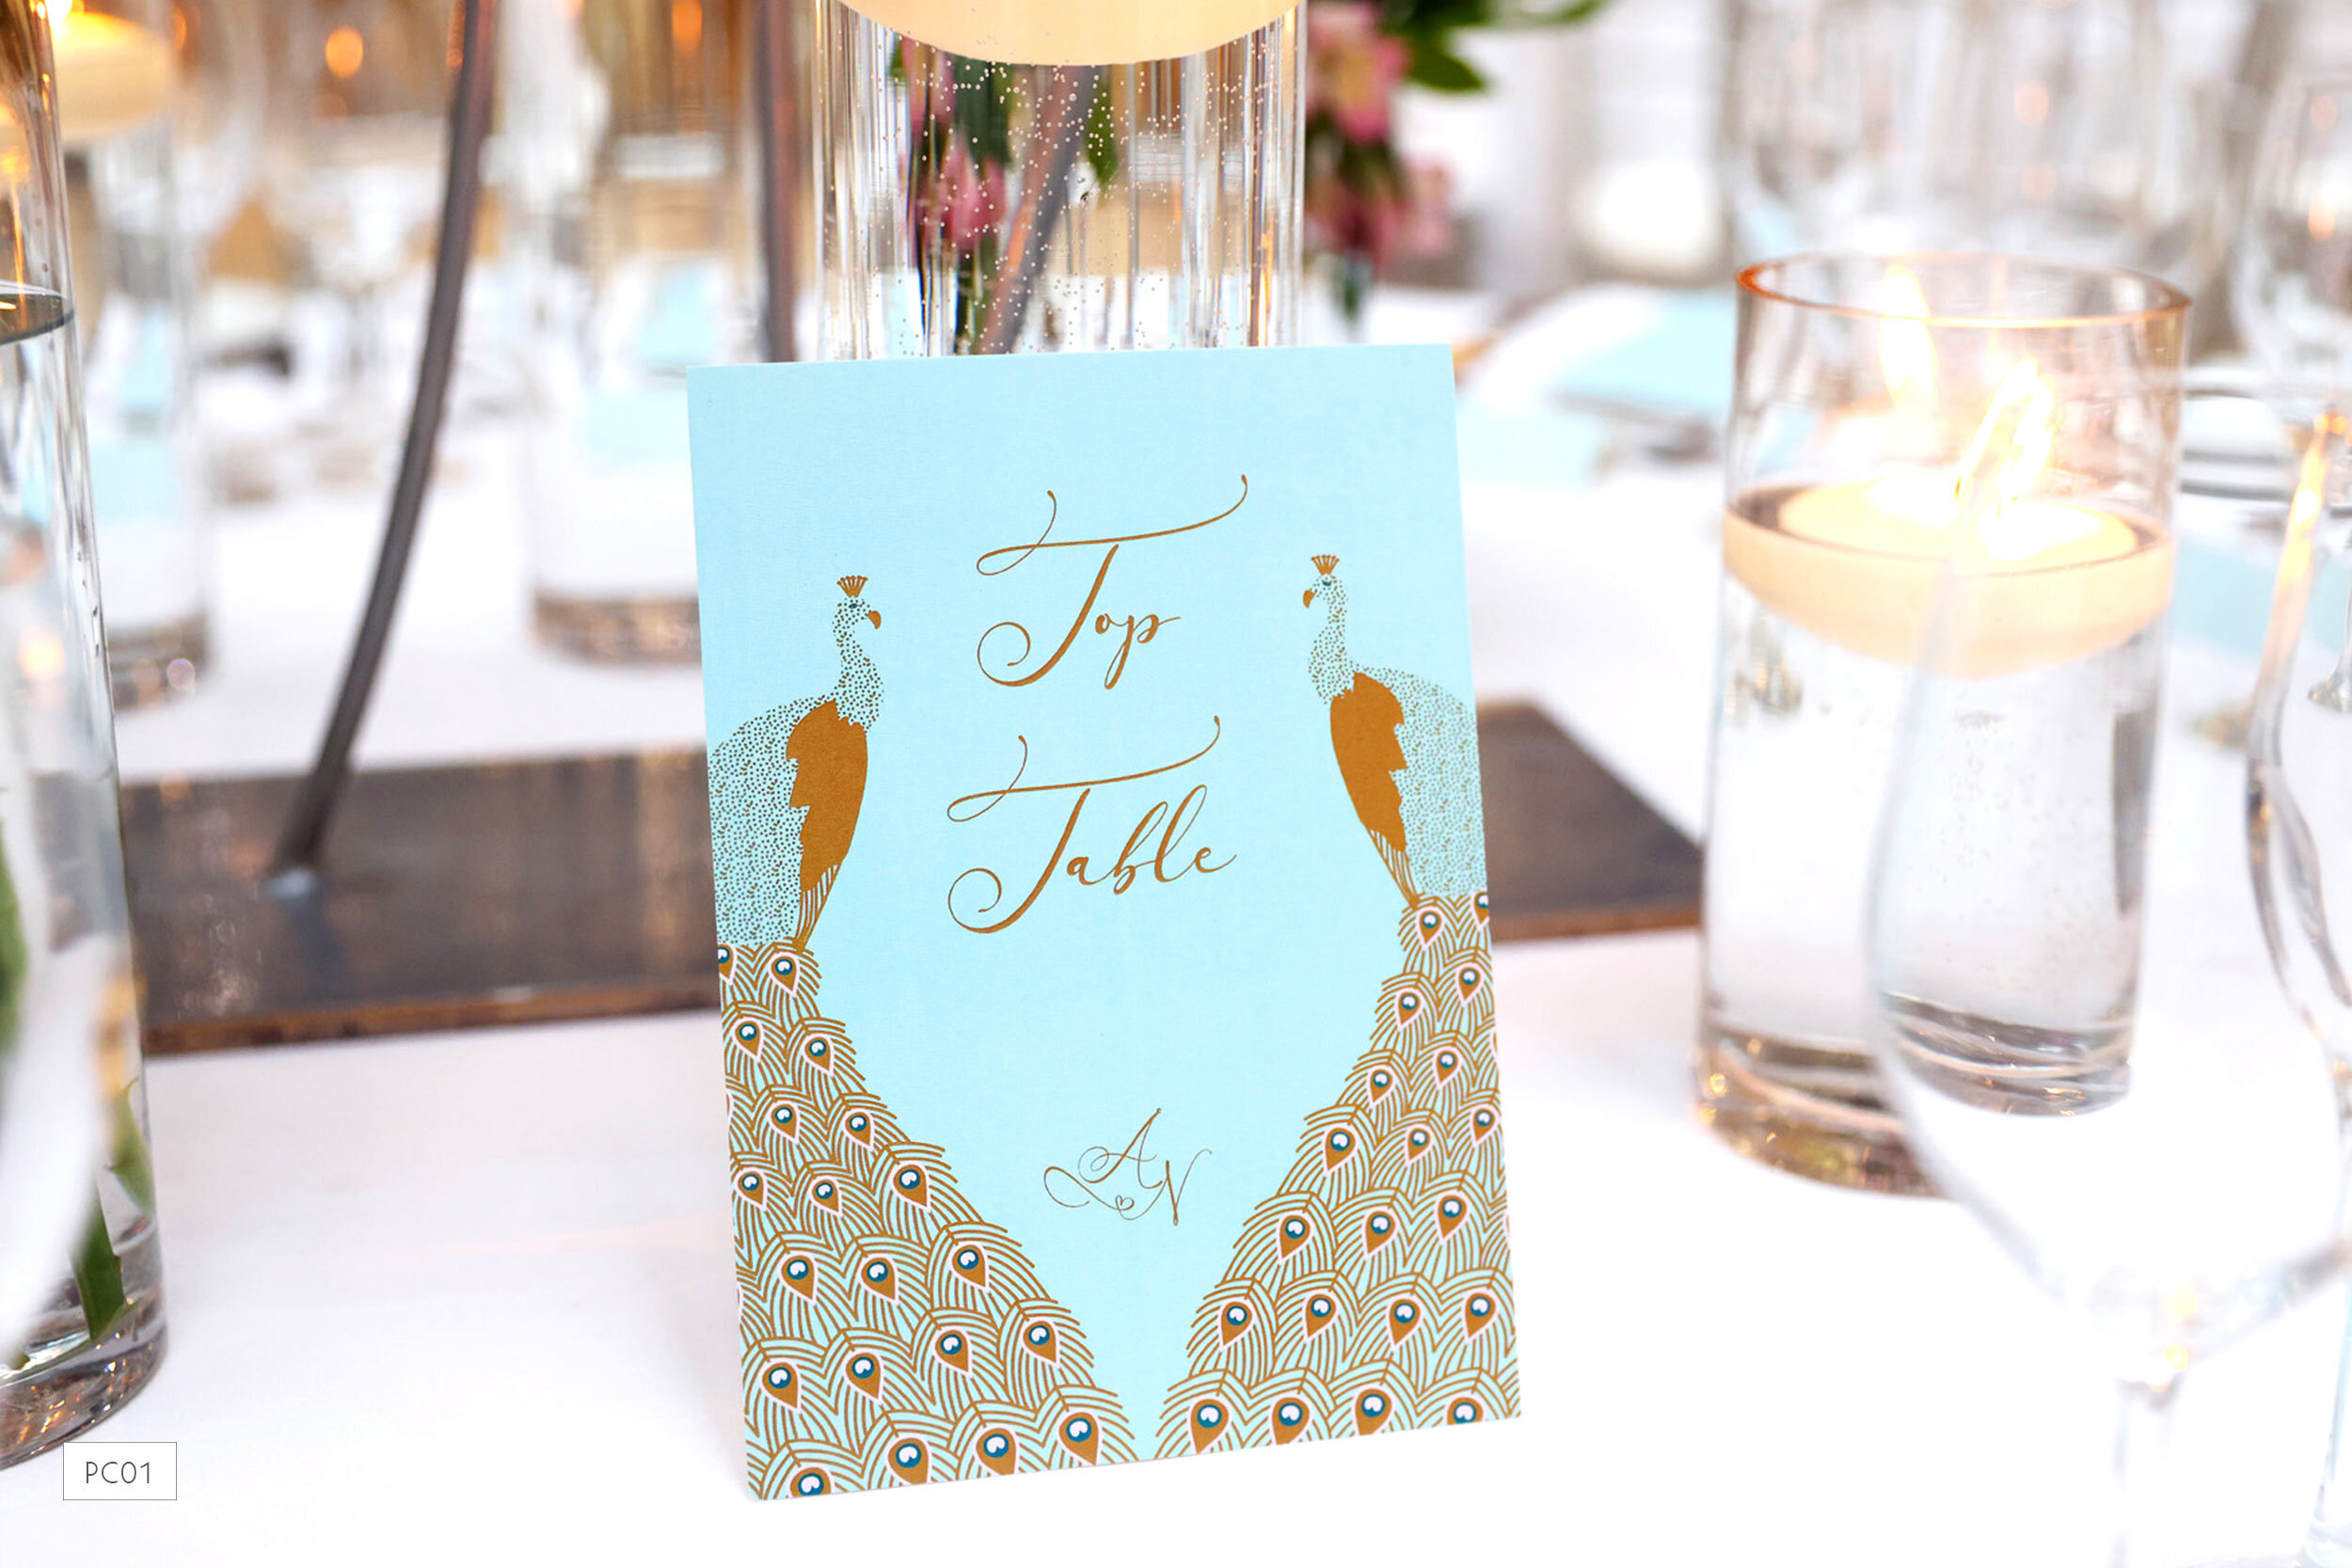 peacock-wedding-stationery-table-number-design-PC01_ananyacards.com.jpg